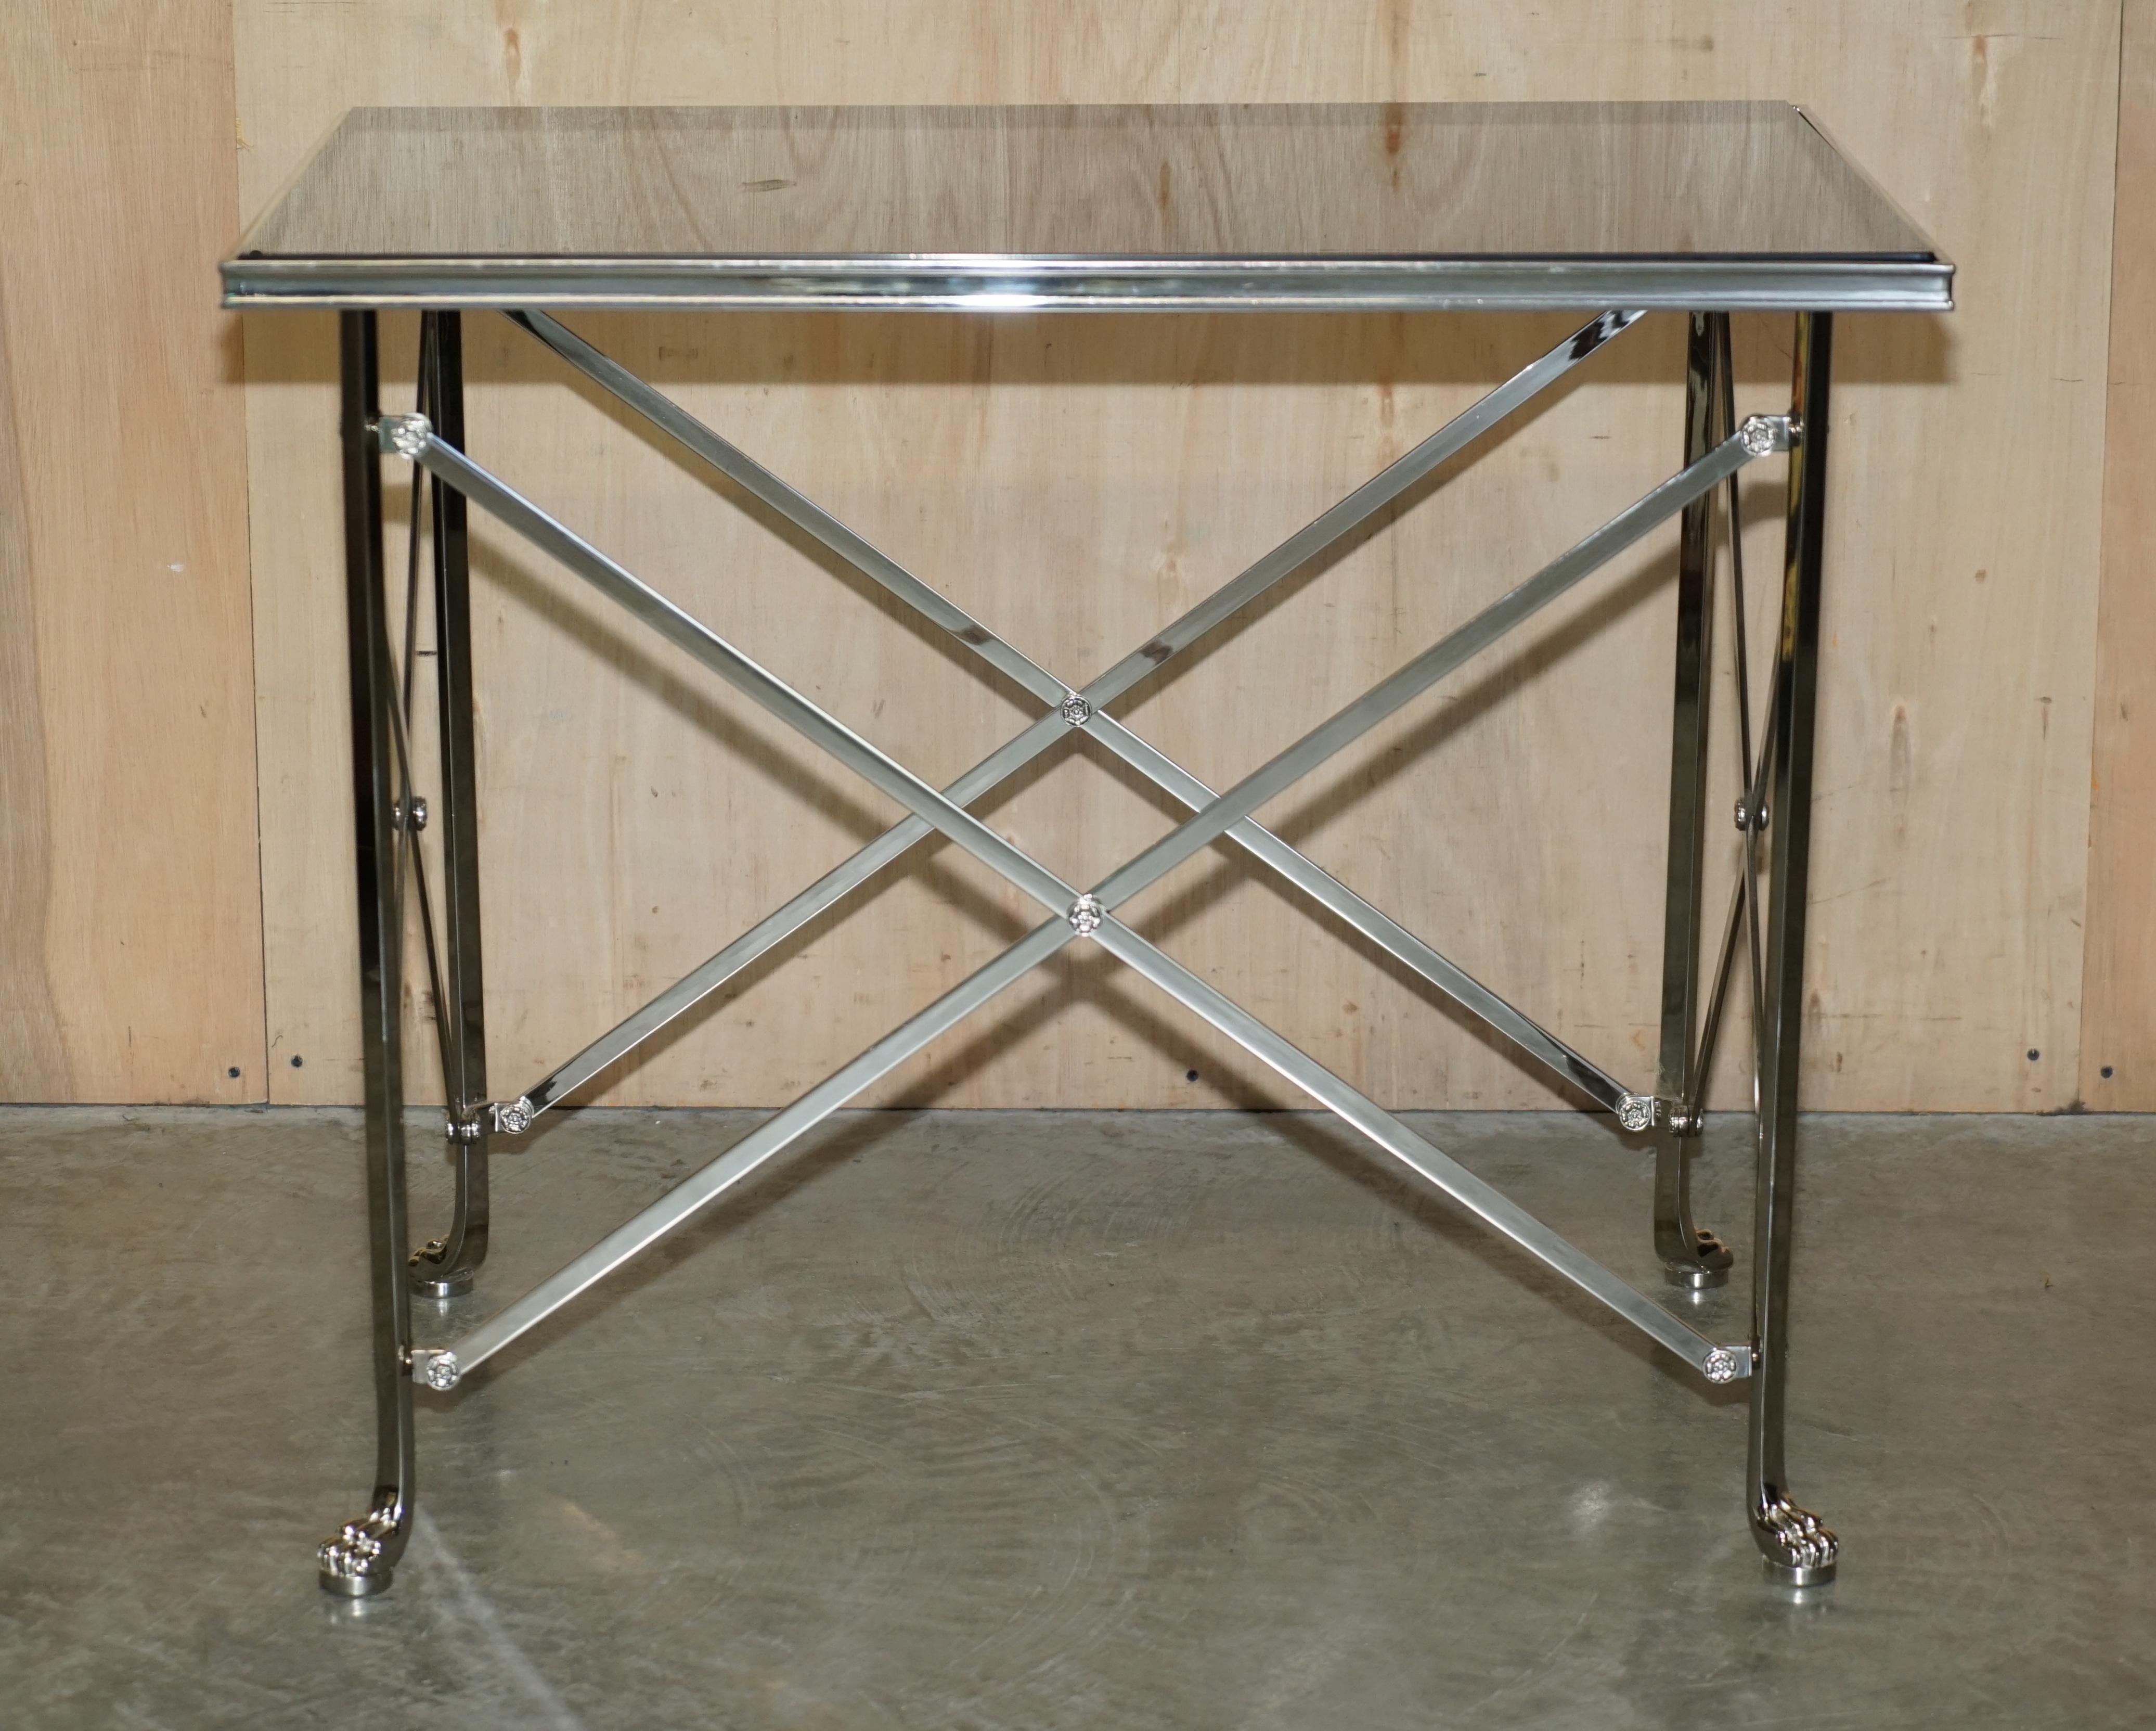 Art Deco Pair of Ralph Lauren Bel Air Console Tables with Lions Paw Feet & Glass Tops